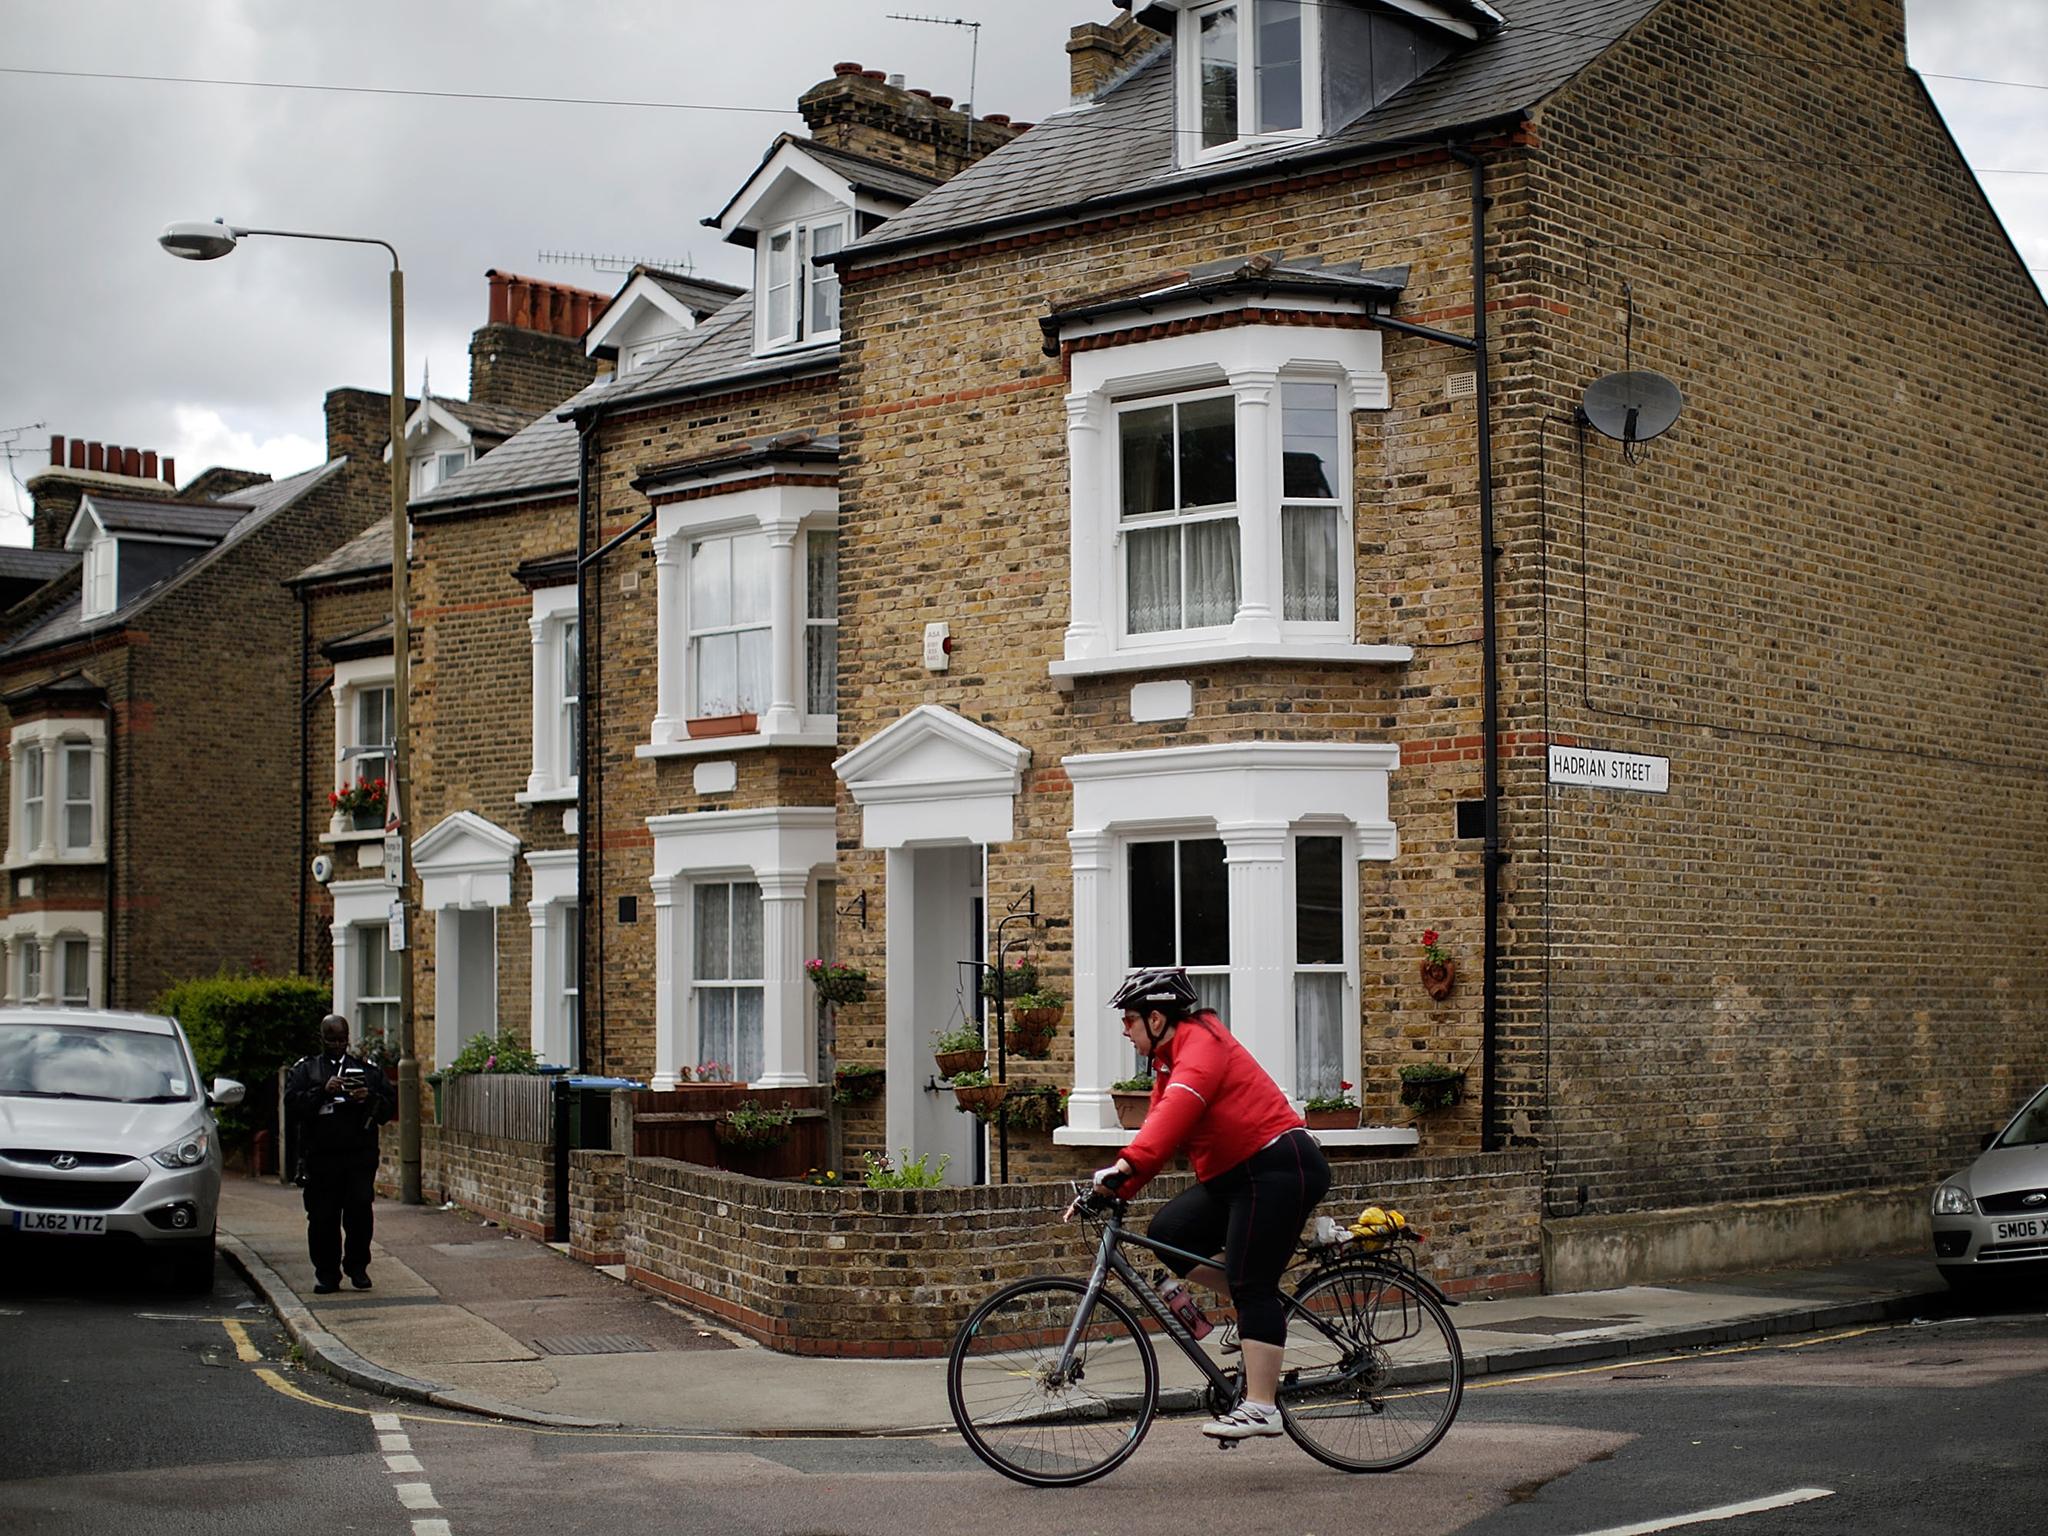 Recent reports suggest the housing crisis isn't just a London problem